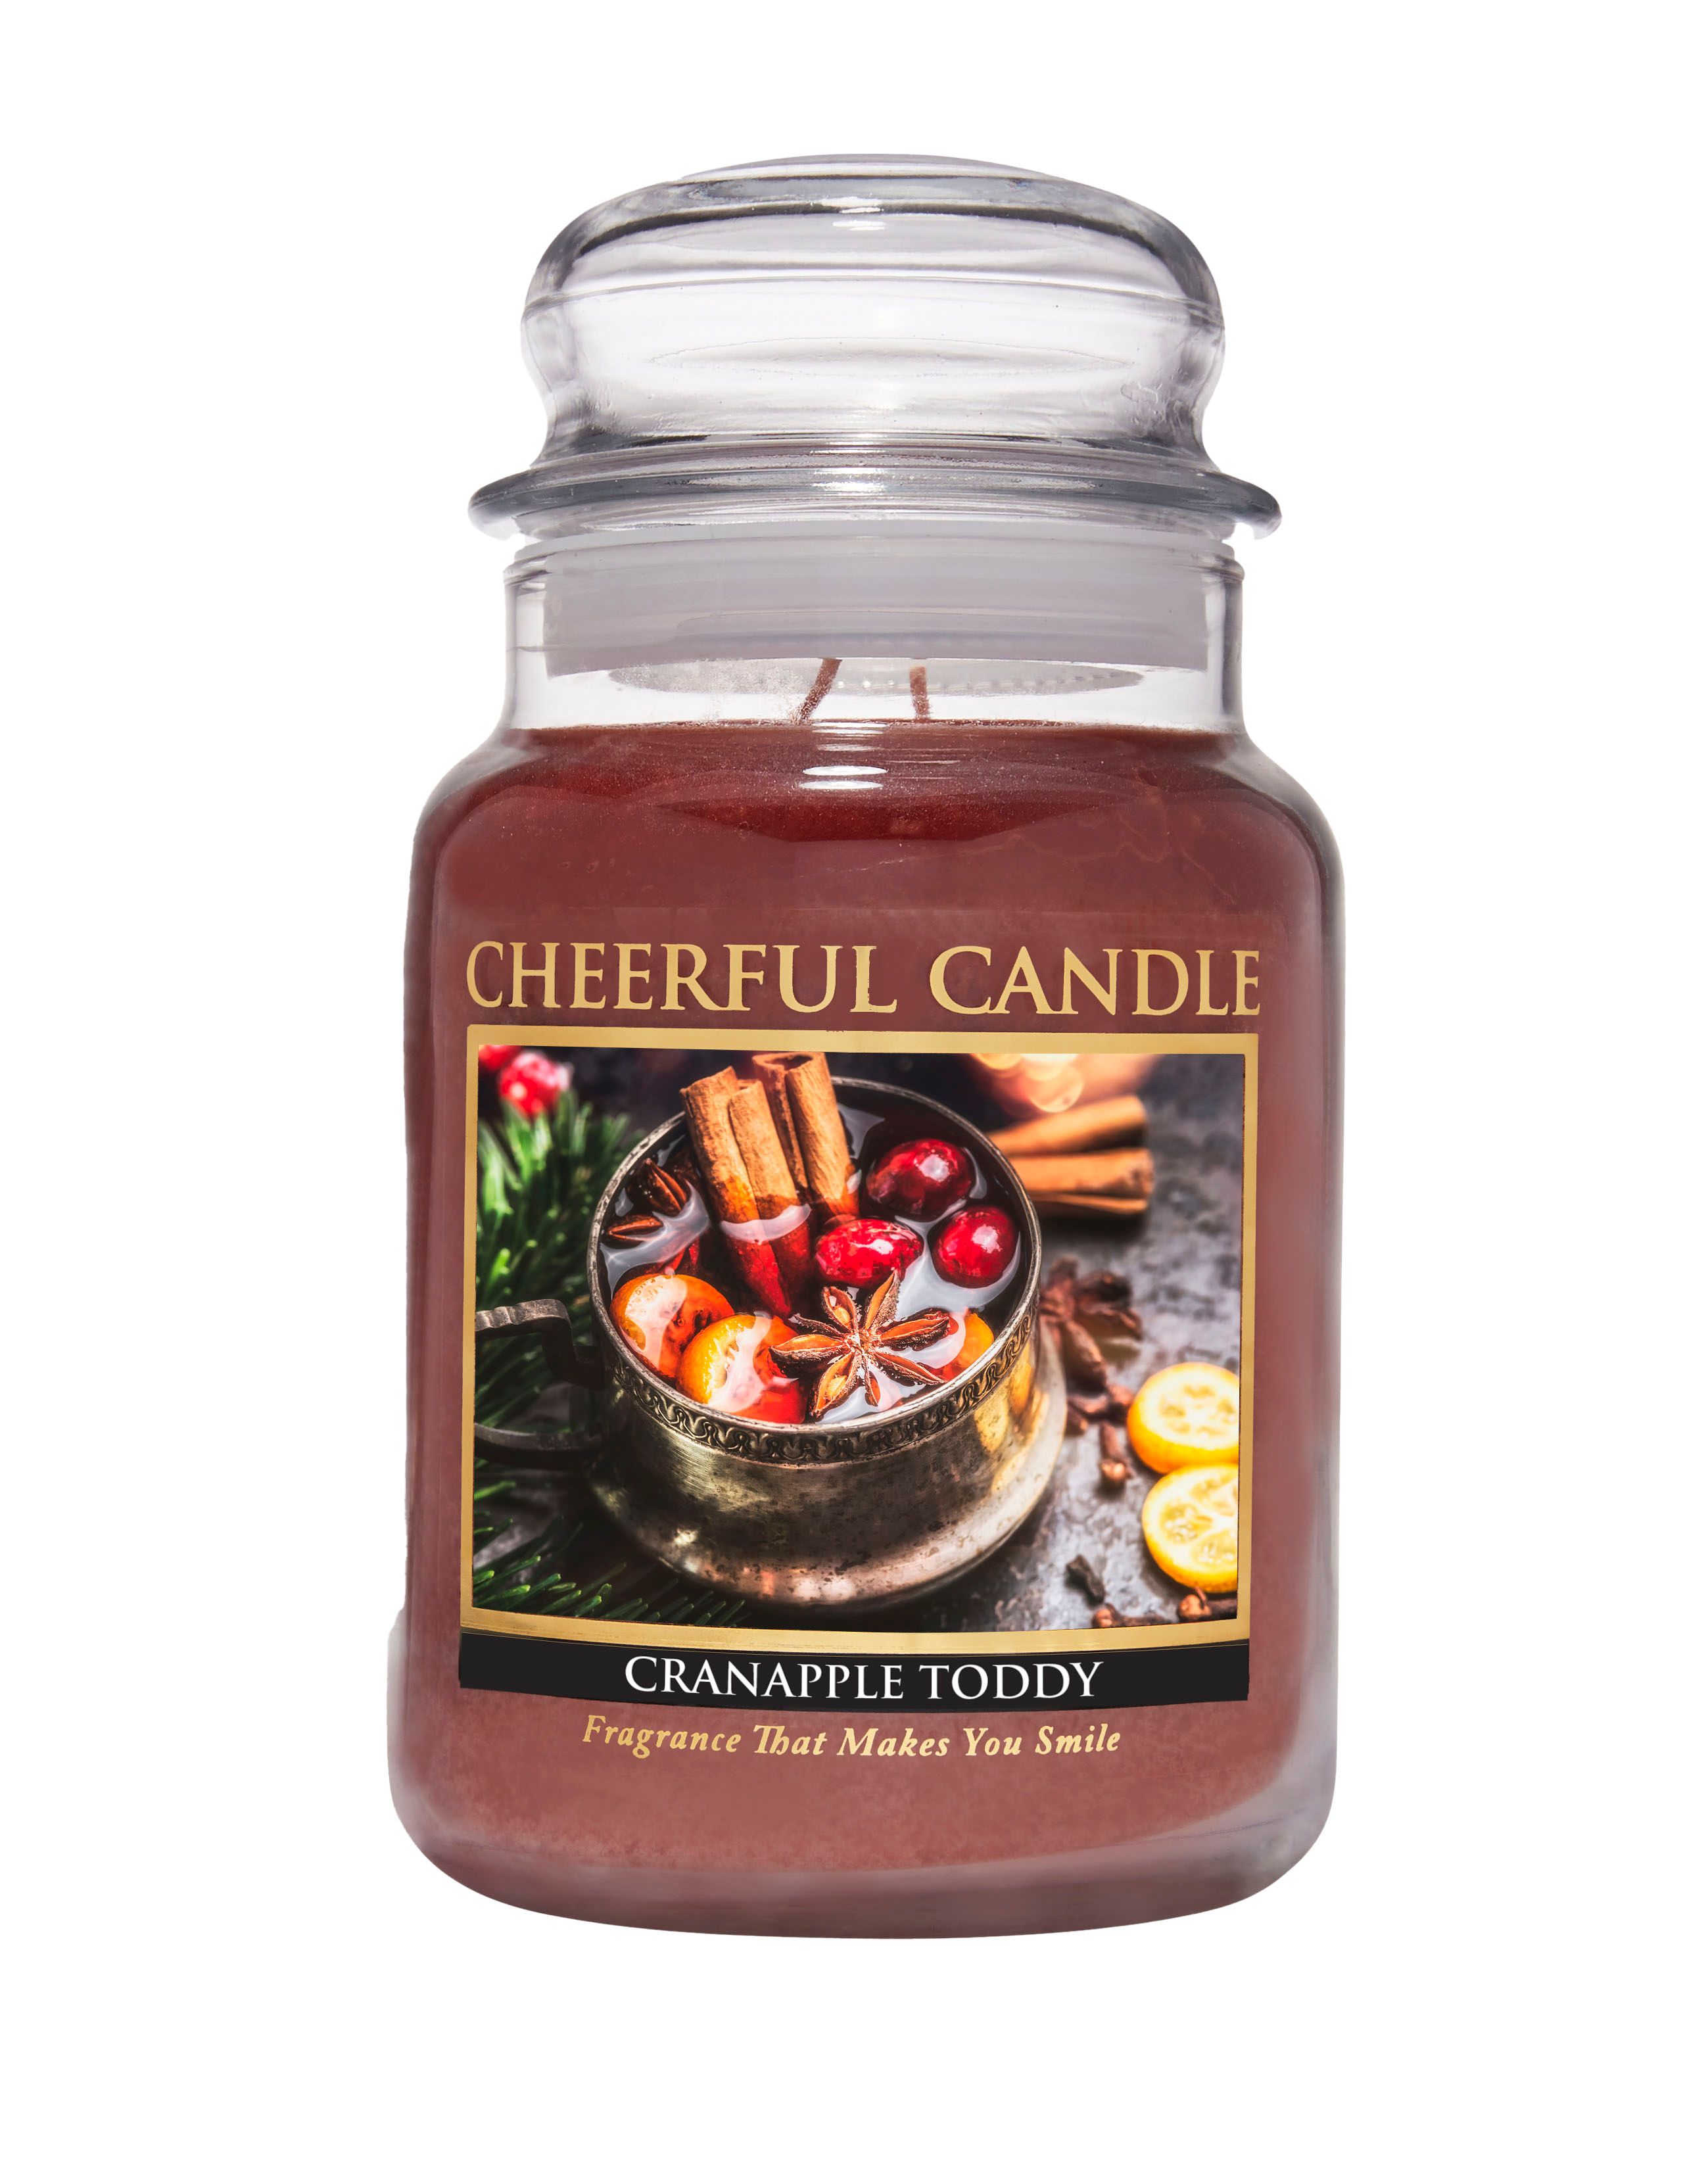 CRANAPPLE TODDY Small  - Cheerful Candle 